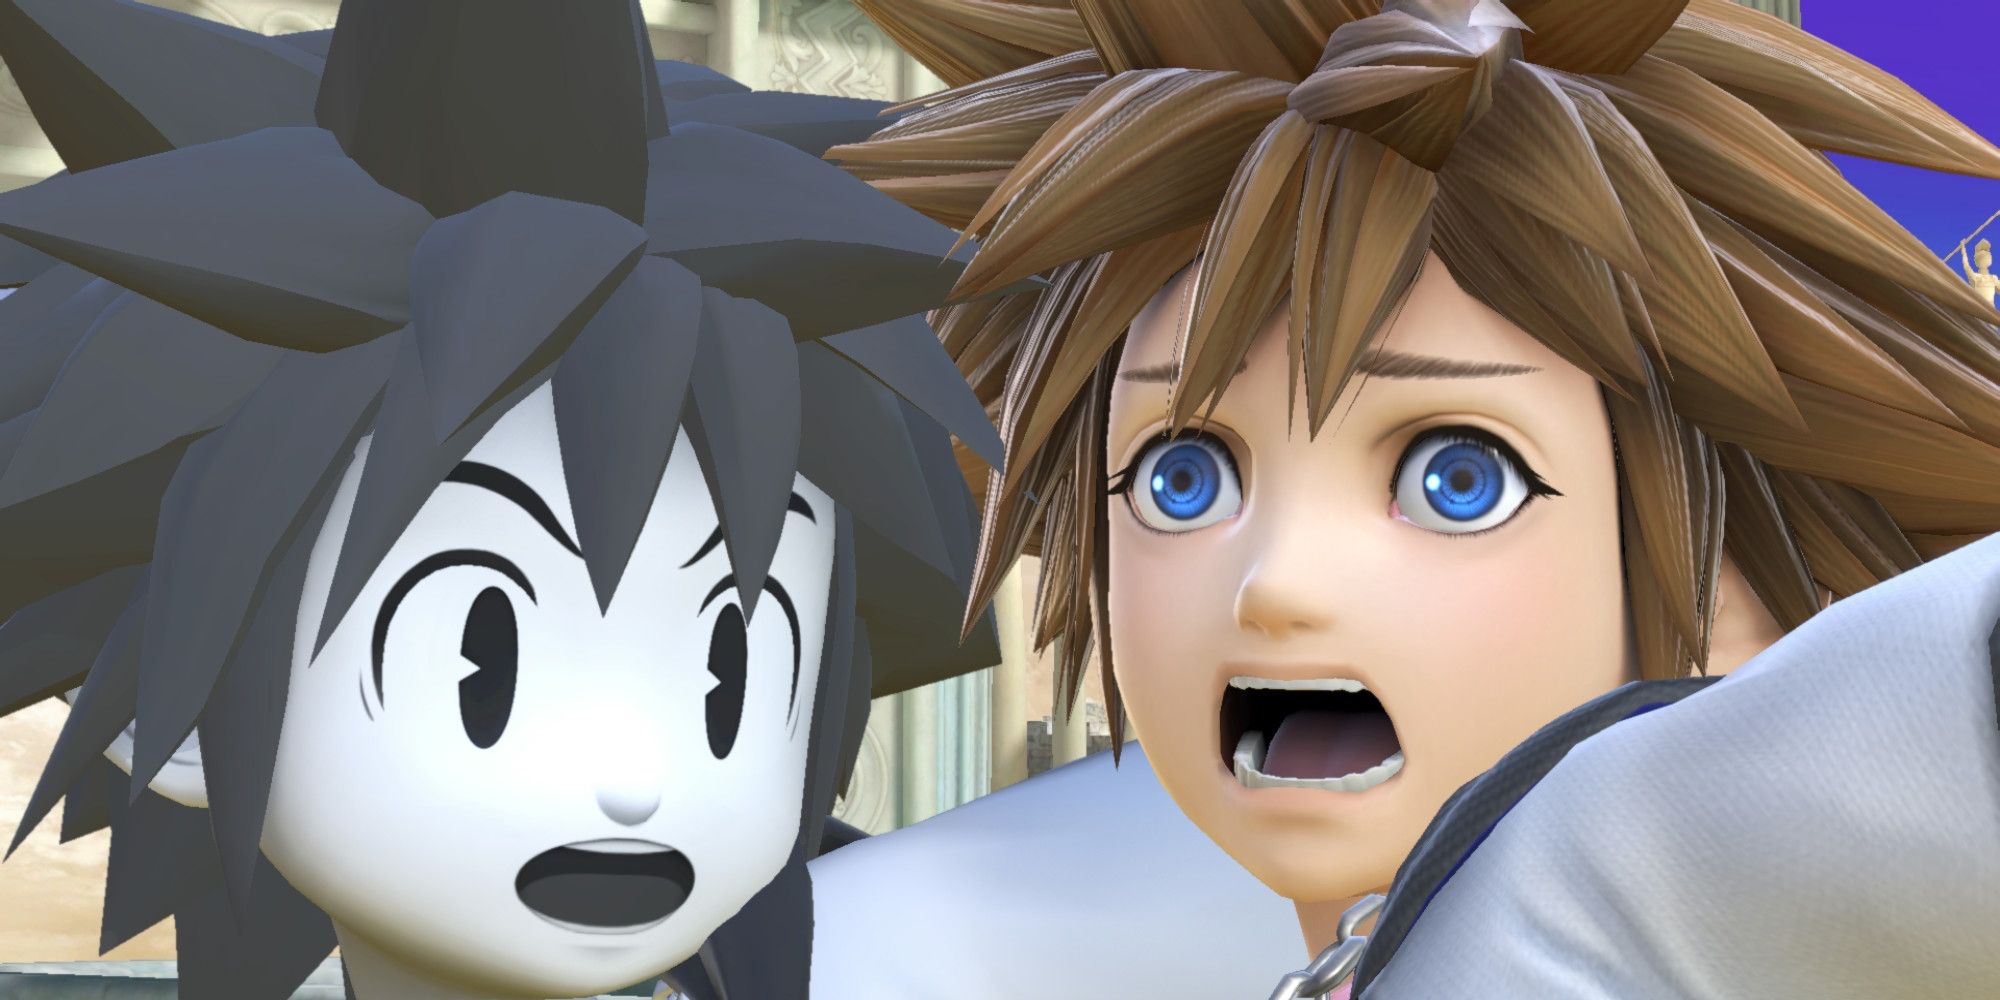 sora-looks-unlikely-to-get-his-own-amiibo